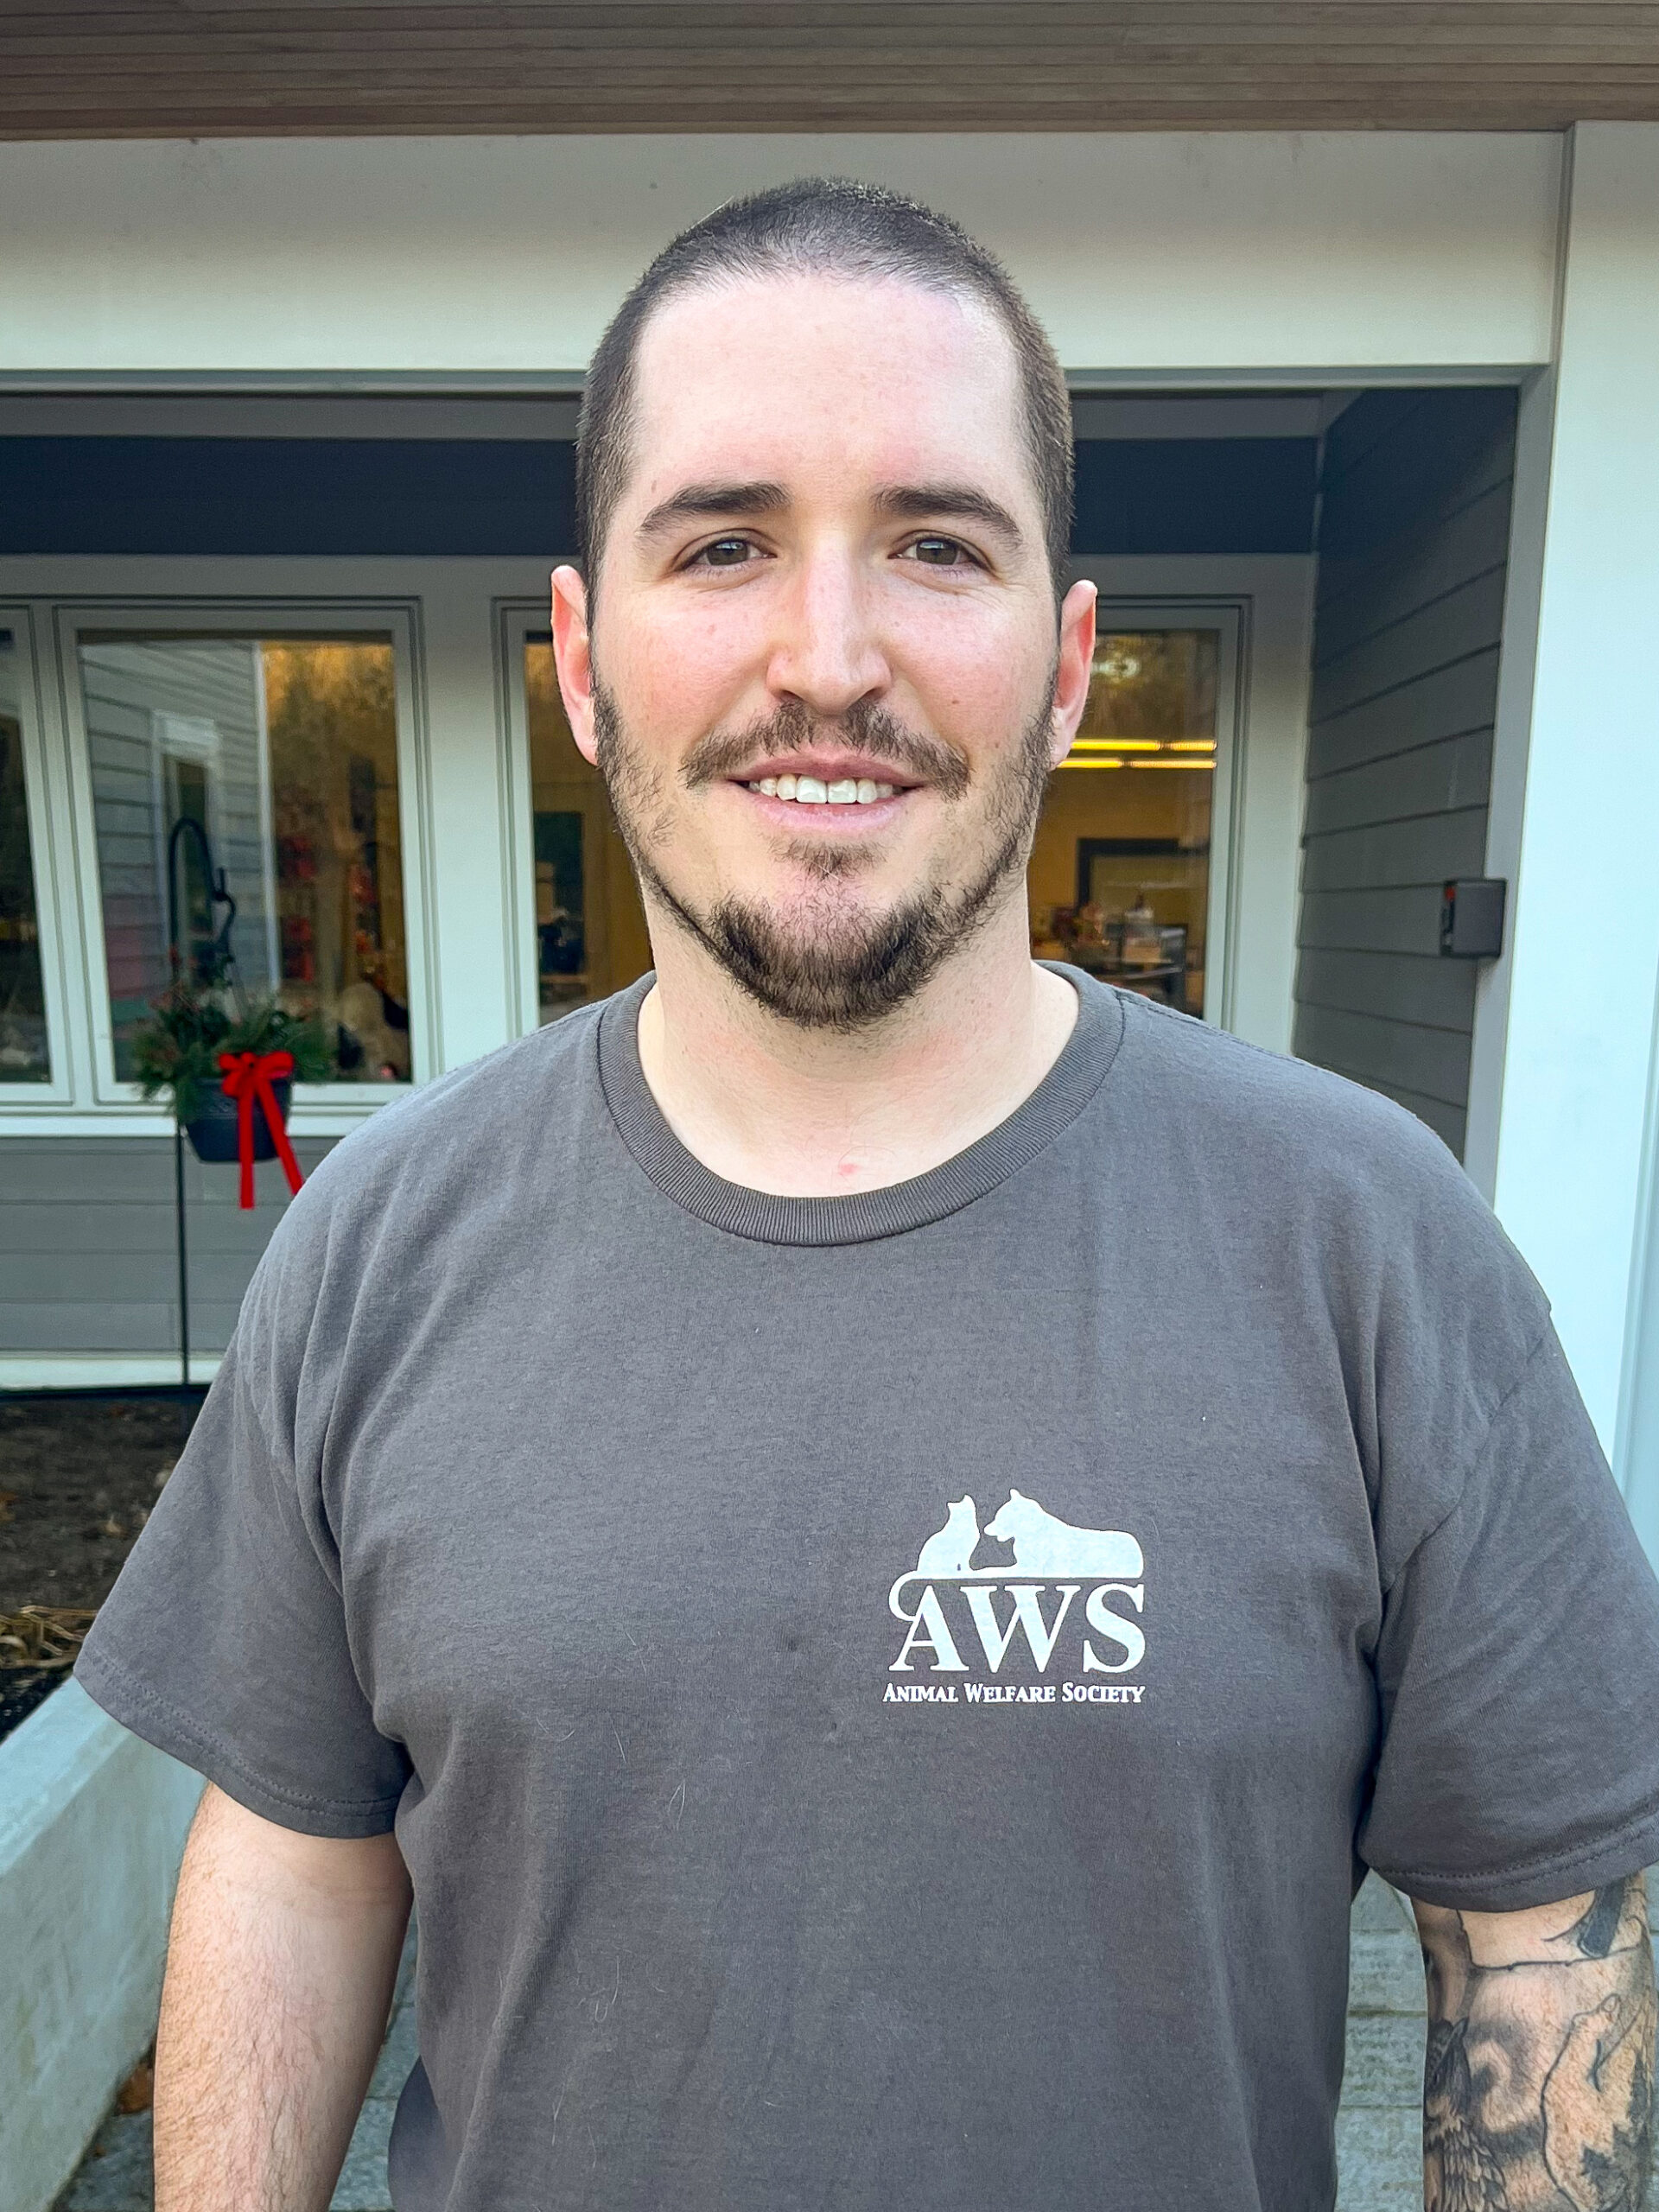 Man wearing an AWS shirt smiles at camera in front of building.